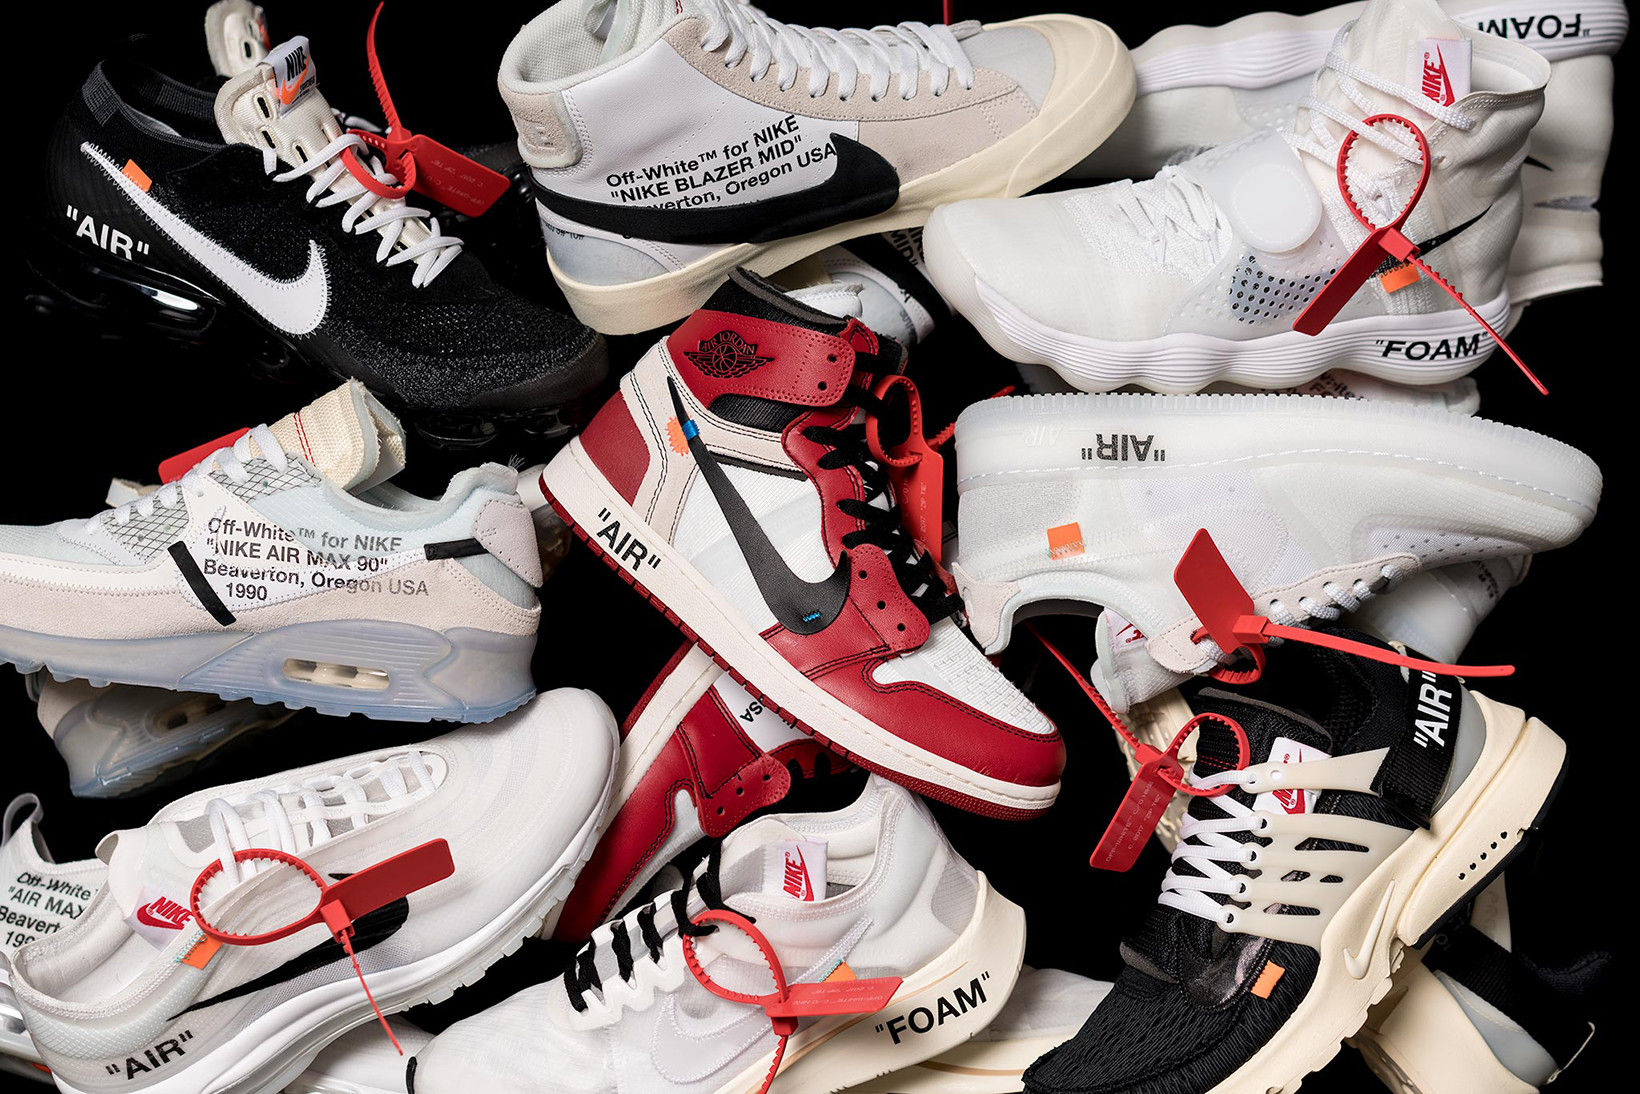 The Top Celebrity Sneaker Collabs, From Yeezy To Jordans